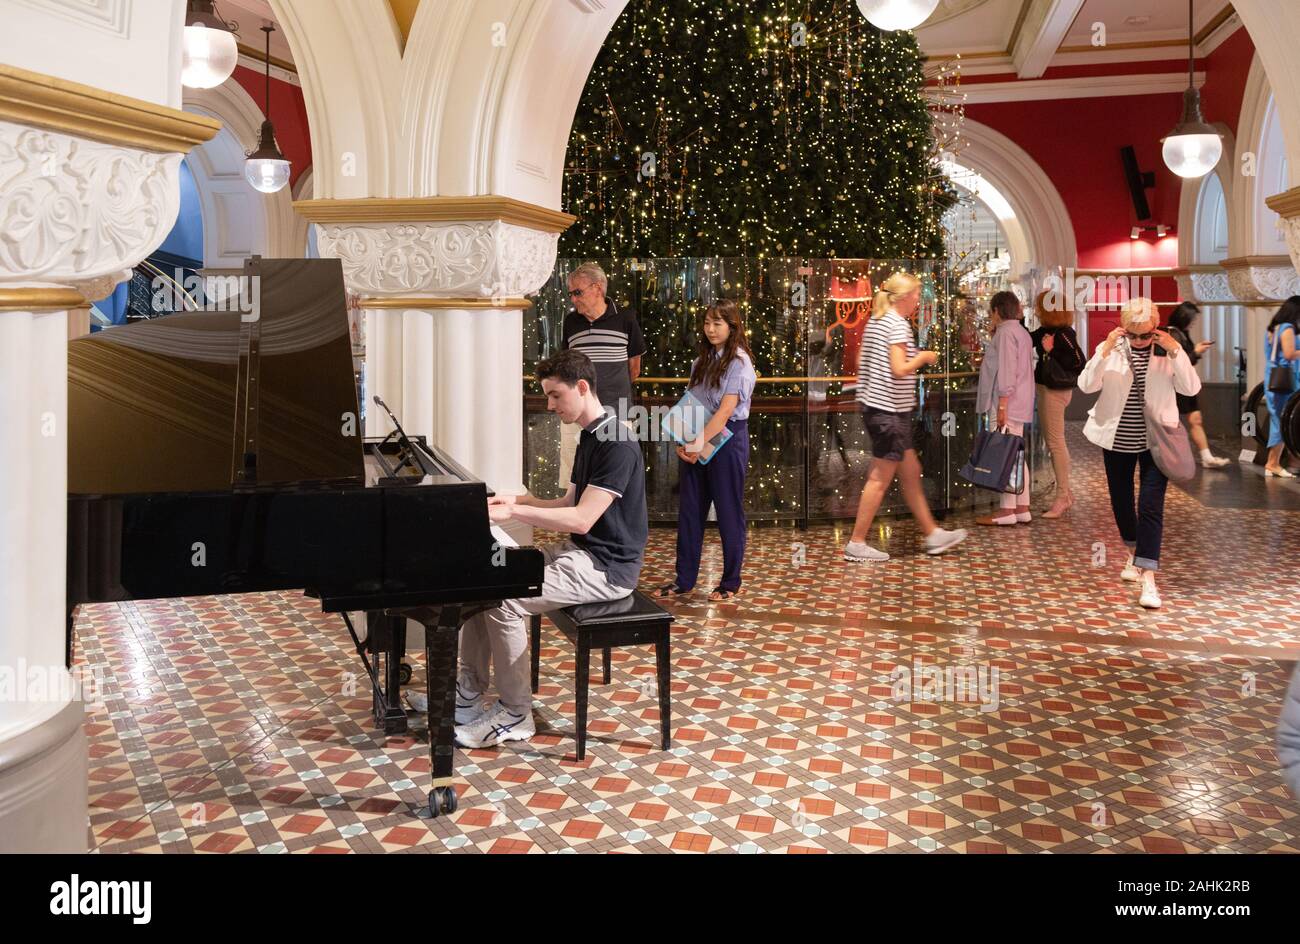 Playing a piano in public; A man playing a public piano in the Queen Victoria building mall, Sydney Australia Stock Photo